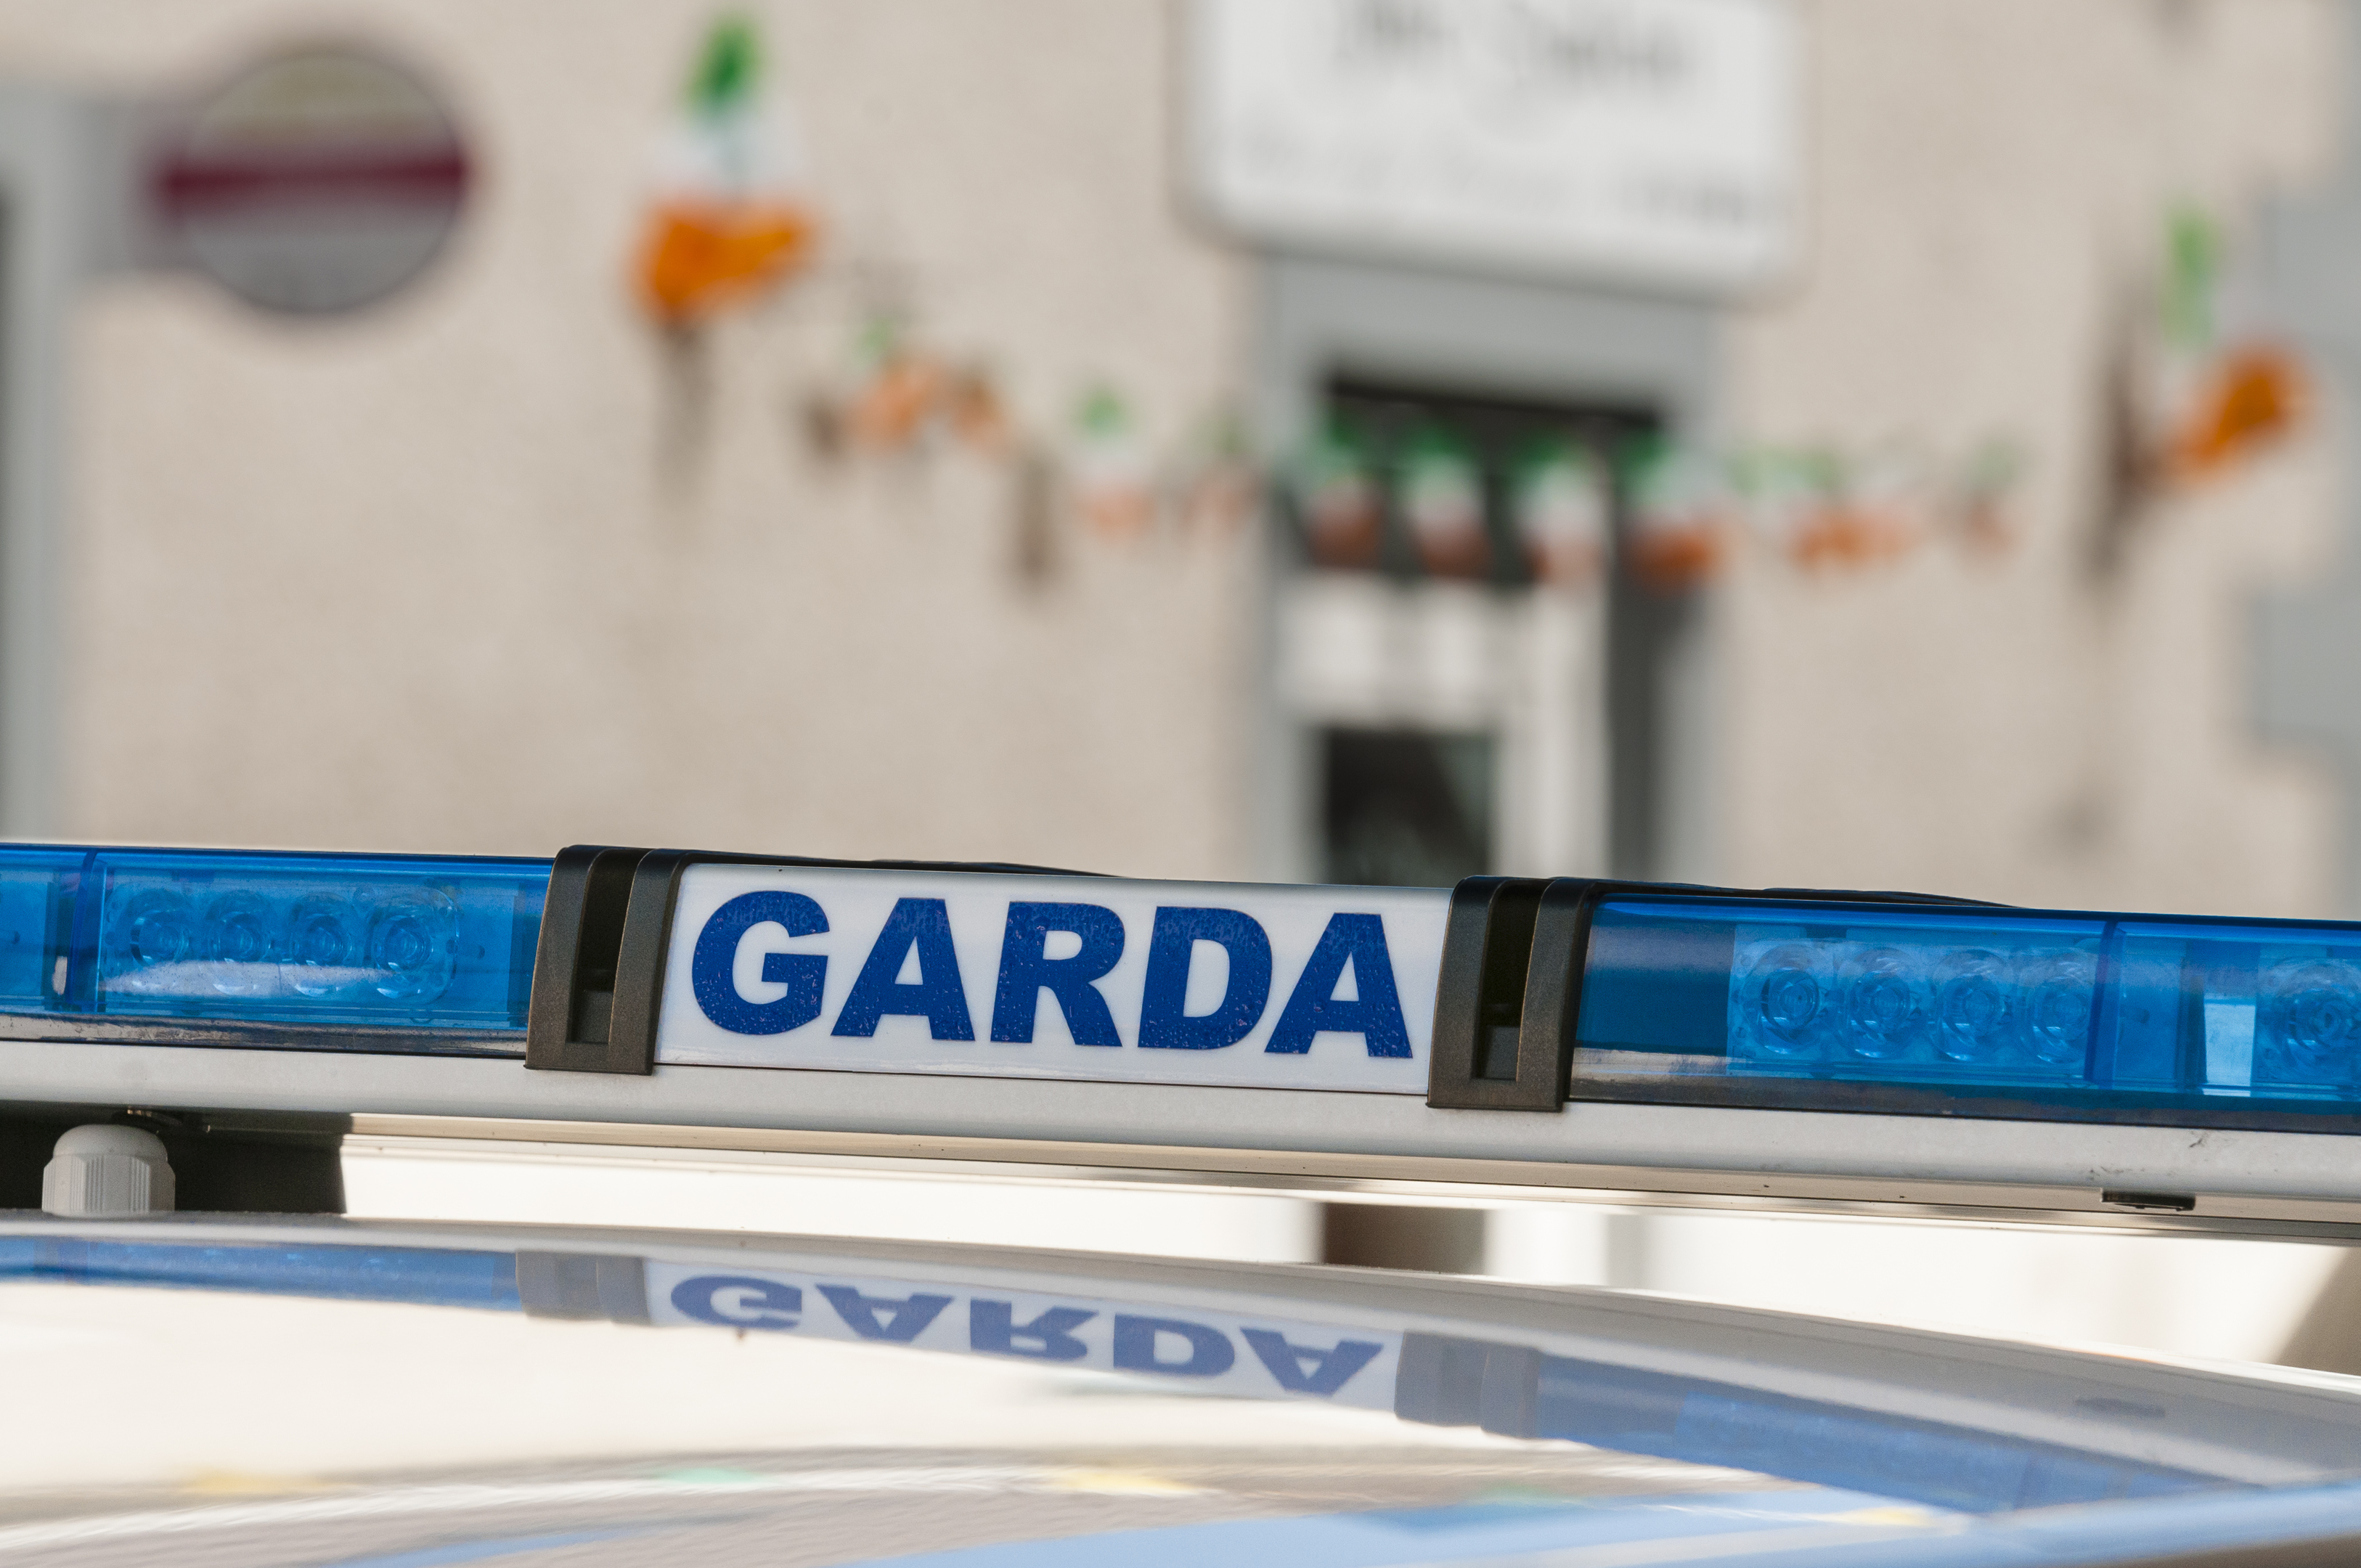 The Garda police have confirmed the woman has died. (Getty images)